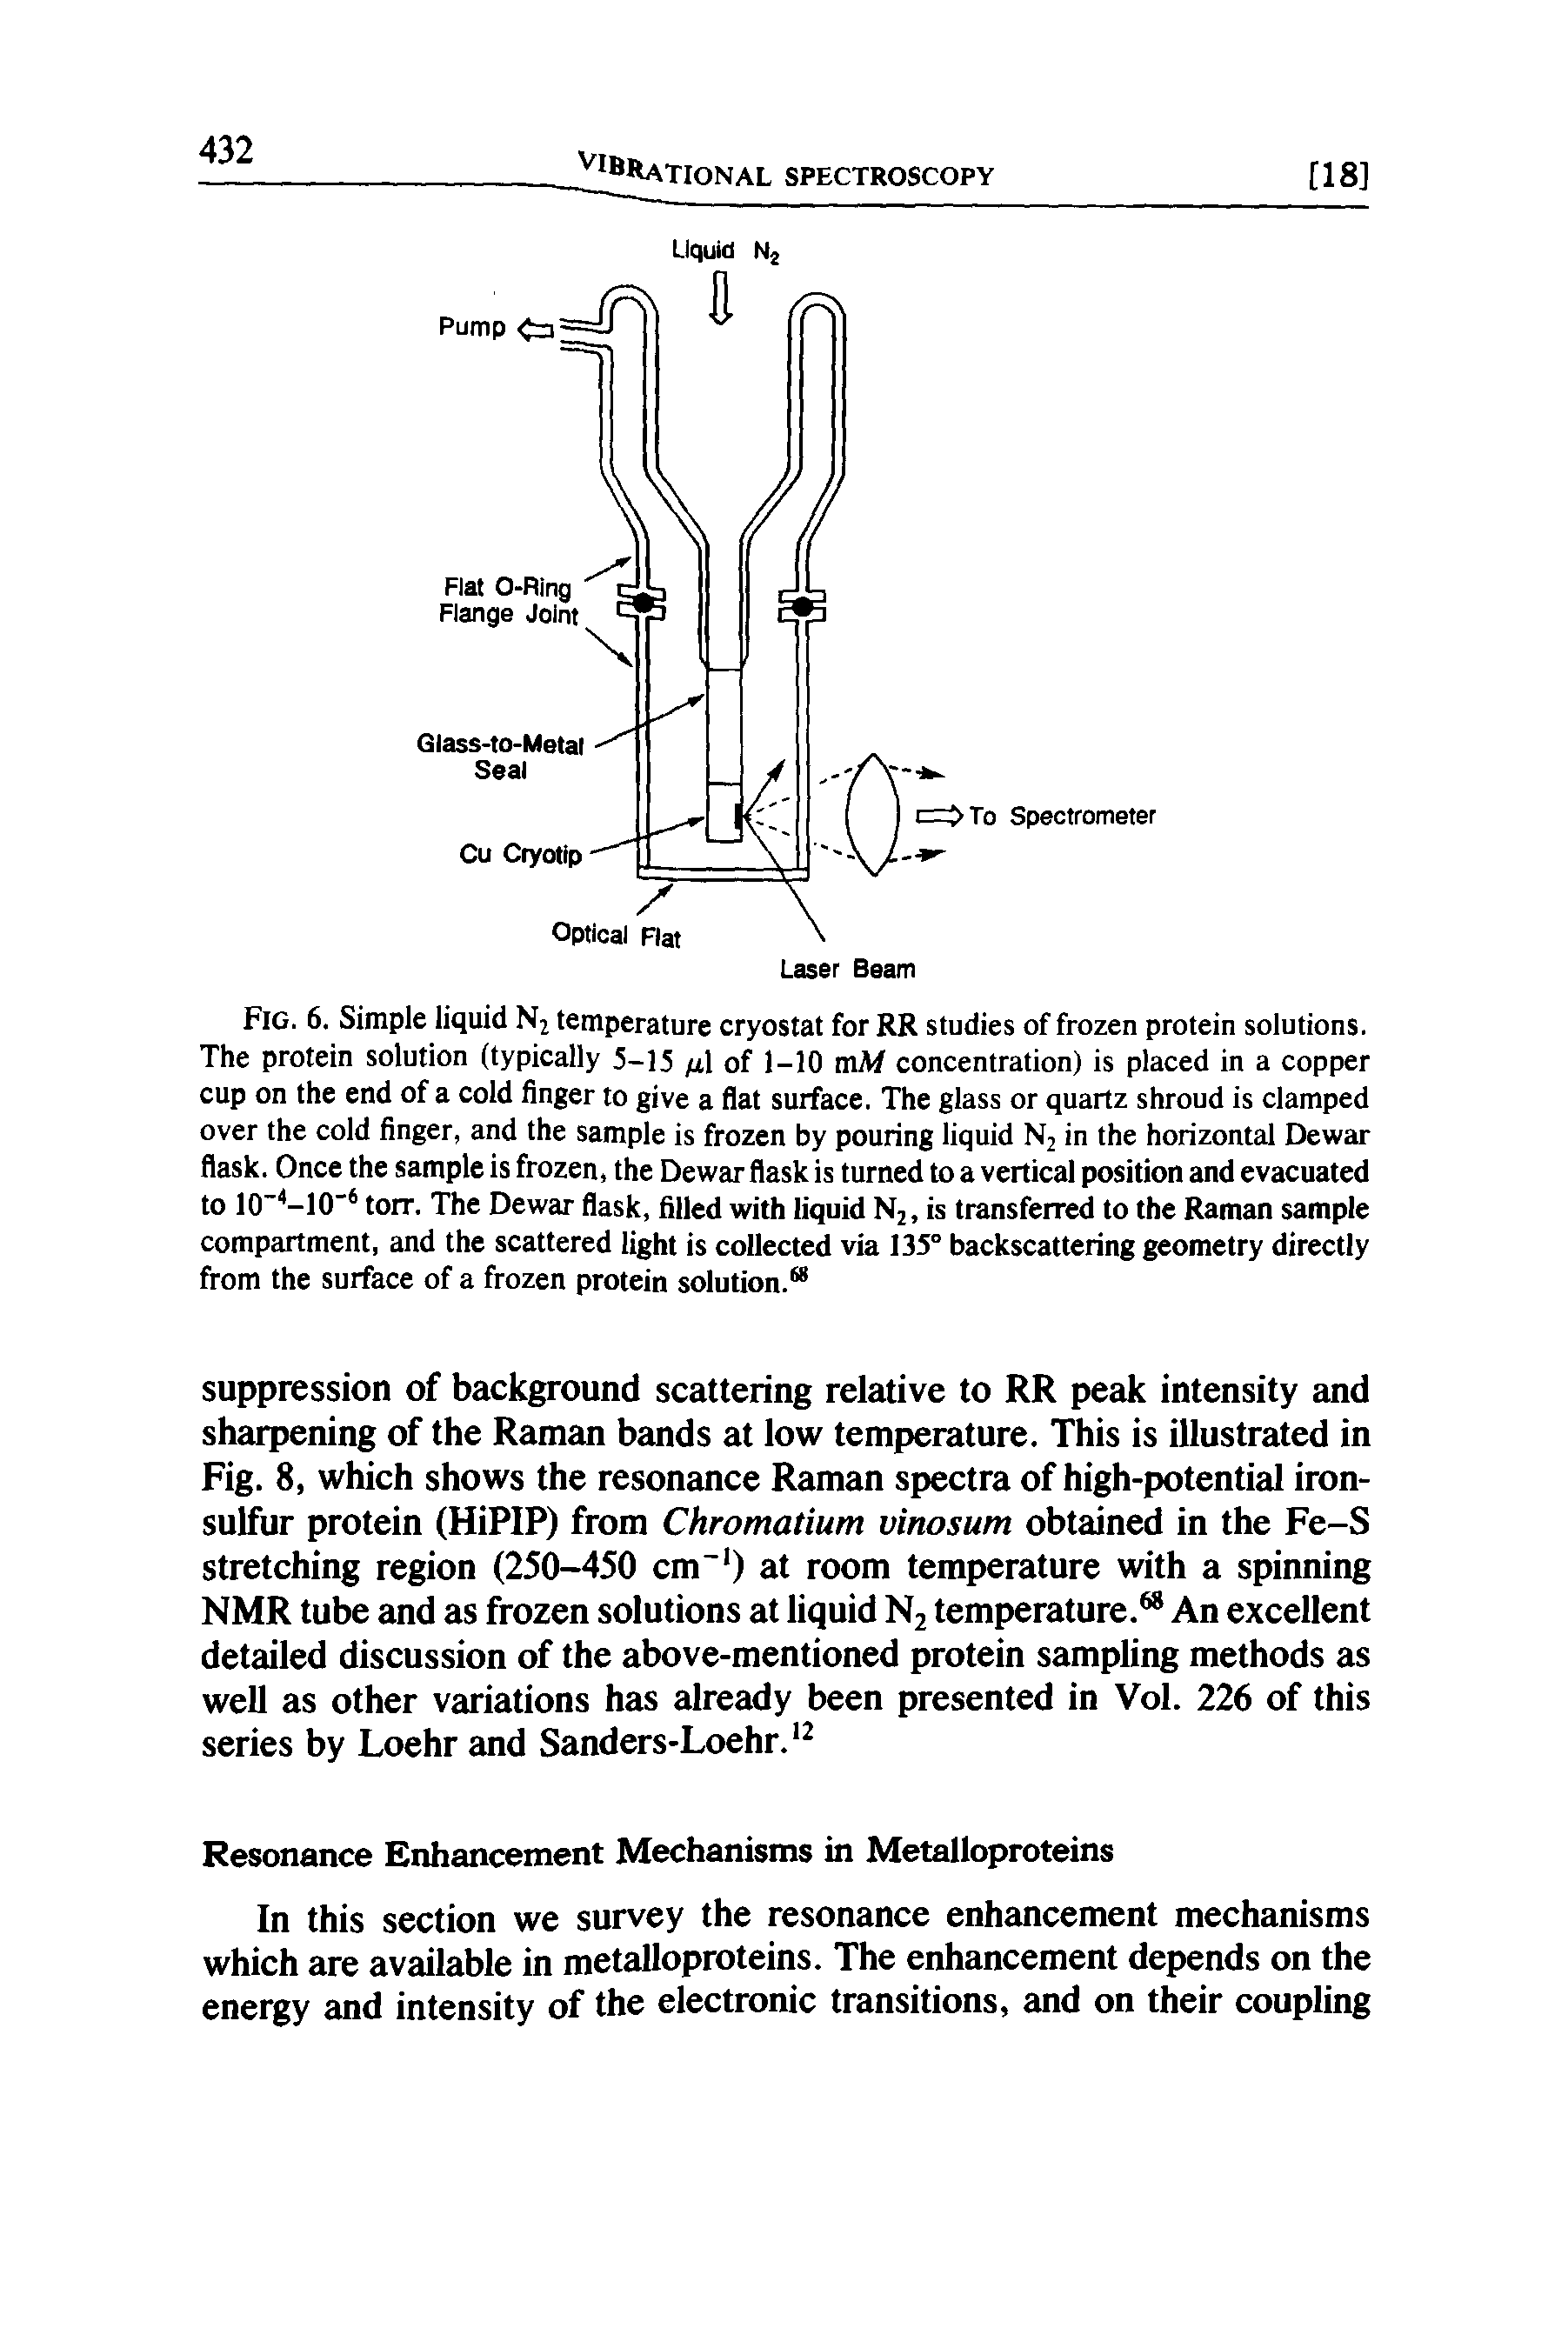 Fig. 6. Simple liquid N2 temperature cryostat for RR studies of frozen protein solutions. The protein solution (typically 5-15 /xl of 1-10 mM concentration) is placed in a copper cup on the end of a cold finger to give a flat surface. The glass or quartz shroud is clamped over the cold finger, and the sample is frozen by pouring liquid N2 in the horizontal Dewar flask. Once the sample is frozen, the Dewar flask is turned to a vertical position and evacuated to lO -lO" torr. The Dewar flask, filled with liquid N2, is transferred to the Raman sample compartment, and the scattered light is collected via 135° backscattering geometry directly from the surface of a frozen protein solution. ...